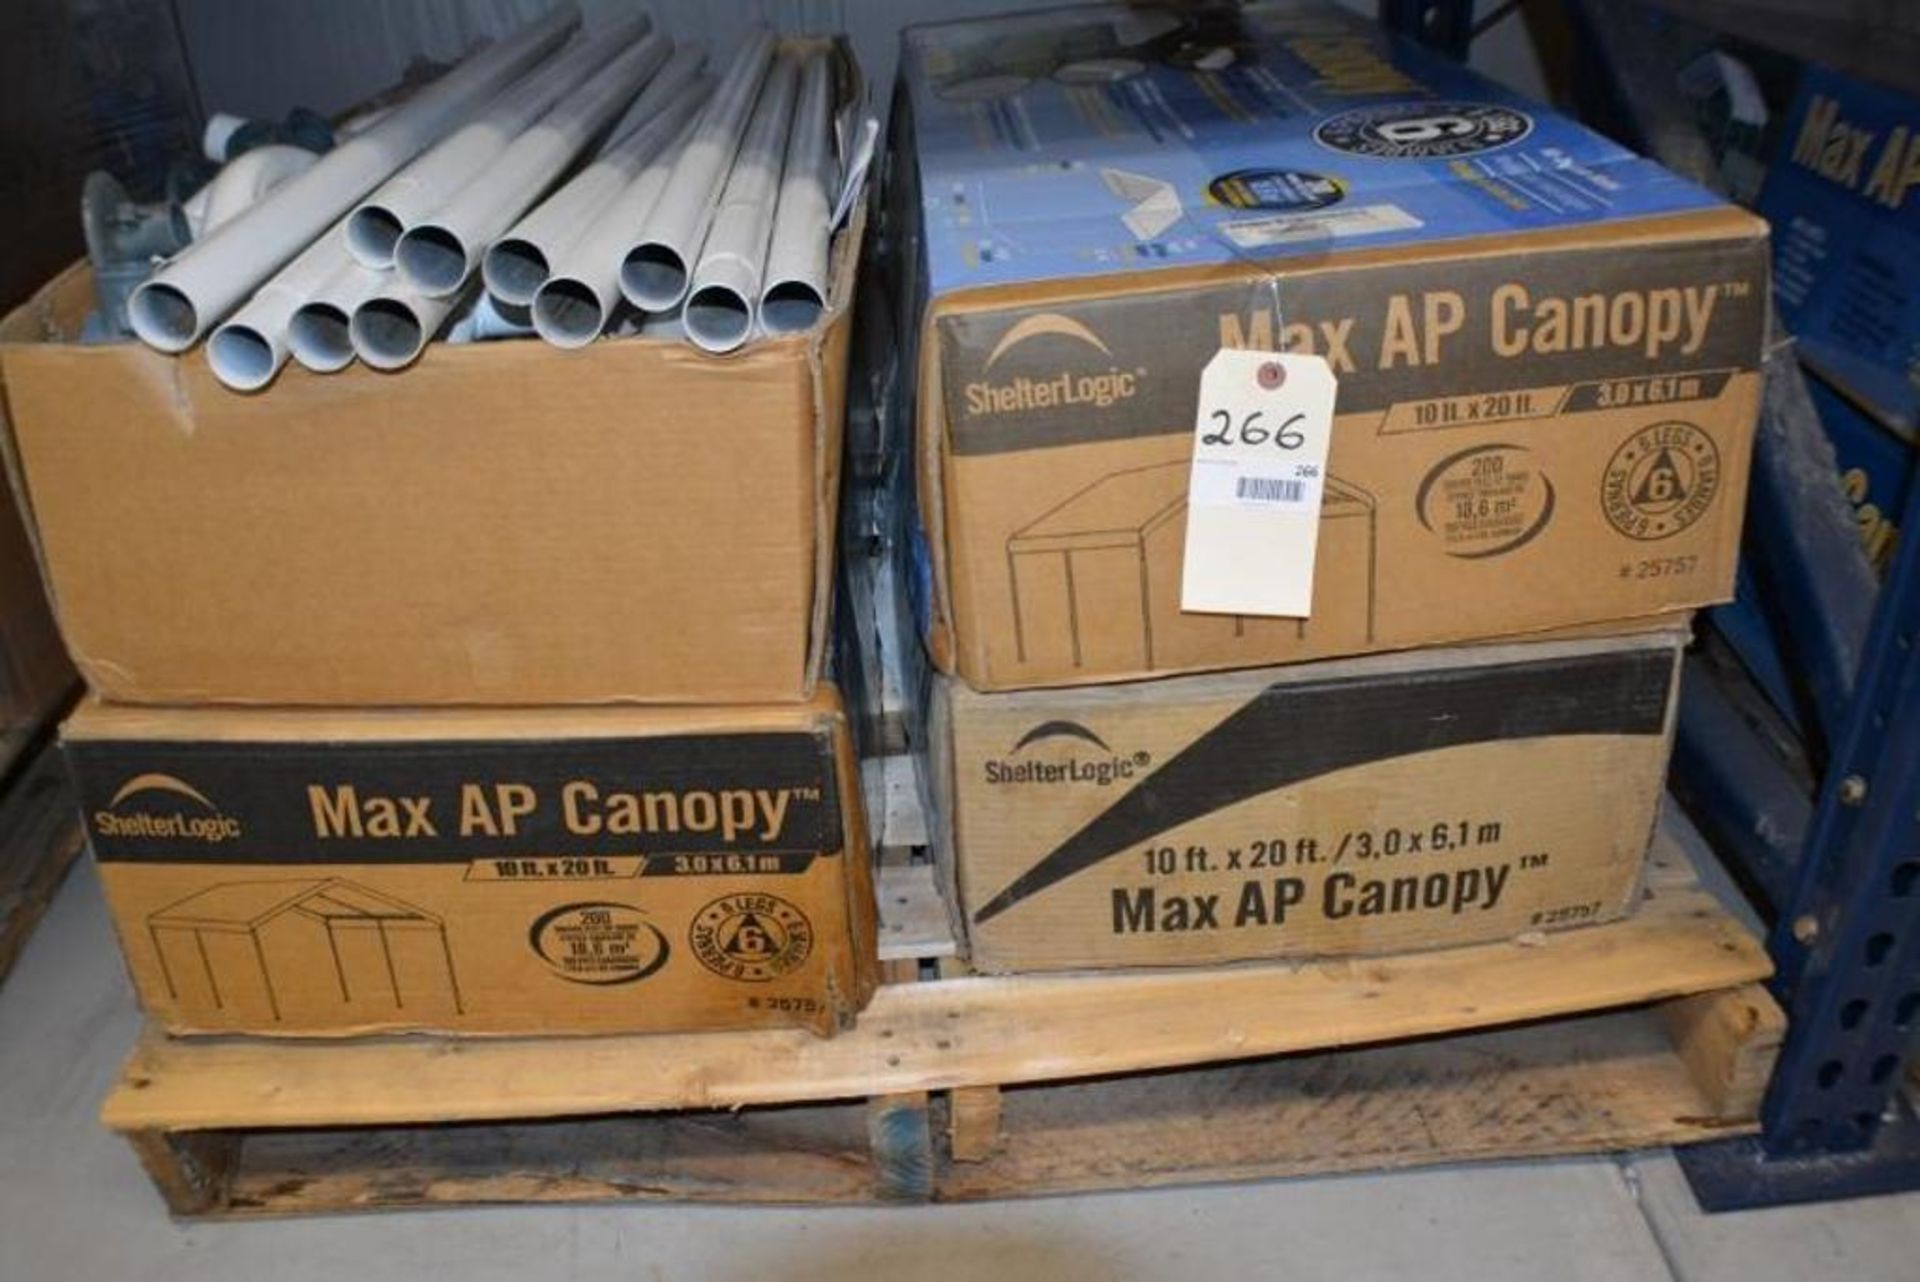 Max AP Canopy 10ft x 20ft by shelter Logic. Contents of Pallet